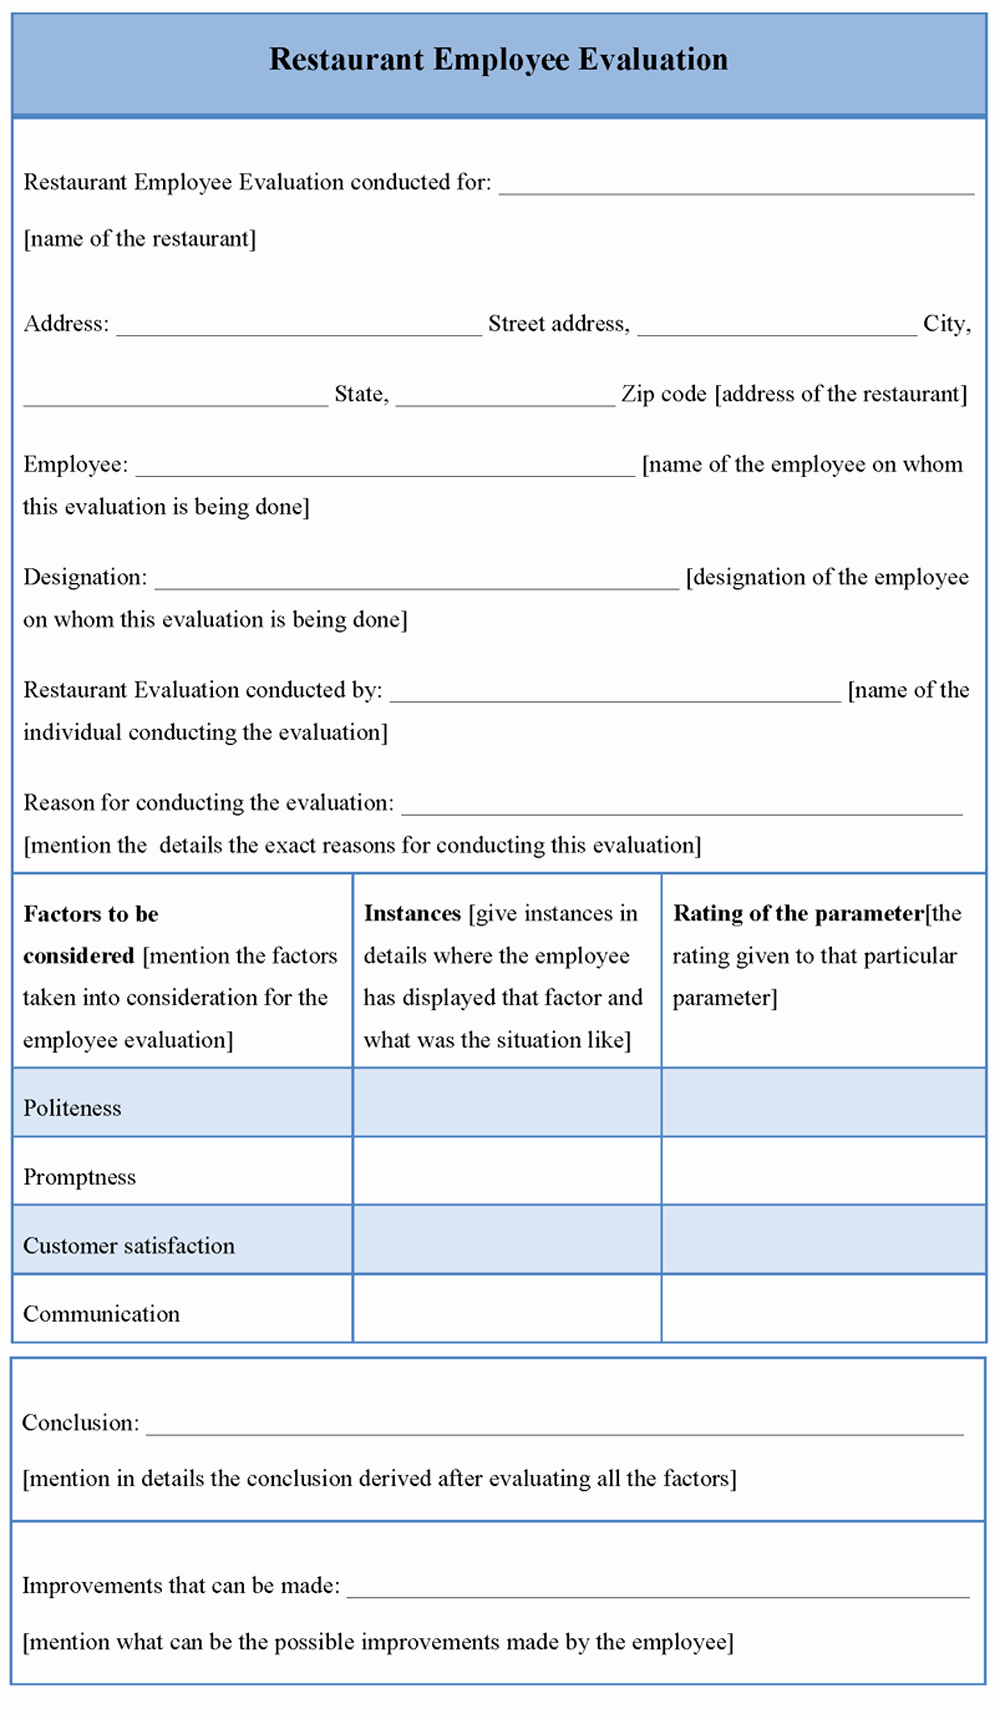 Employee Performance Evaluation Template Best Of Evaluation Template for Restaurant Employee Sample Of